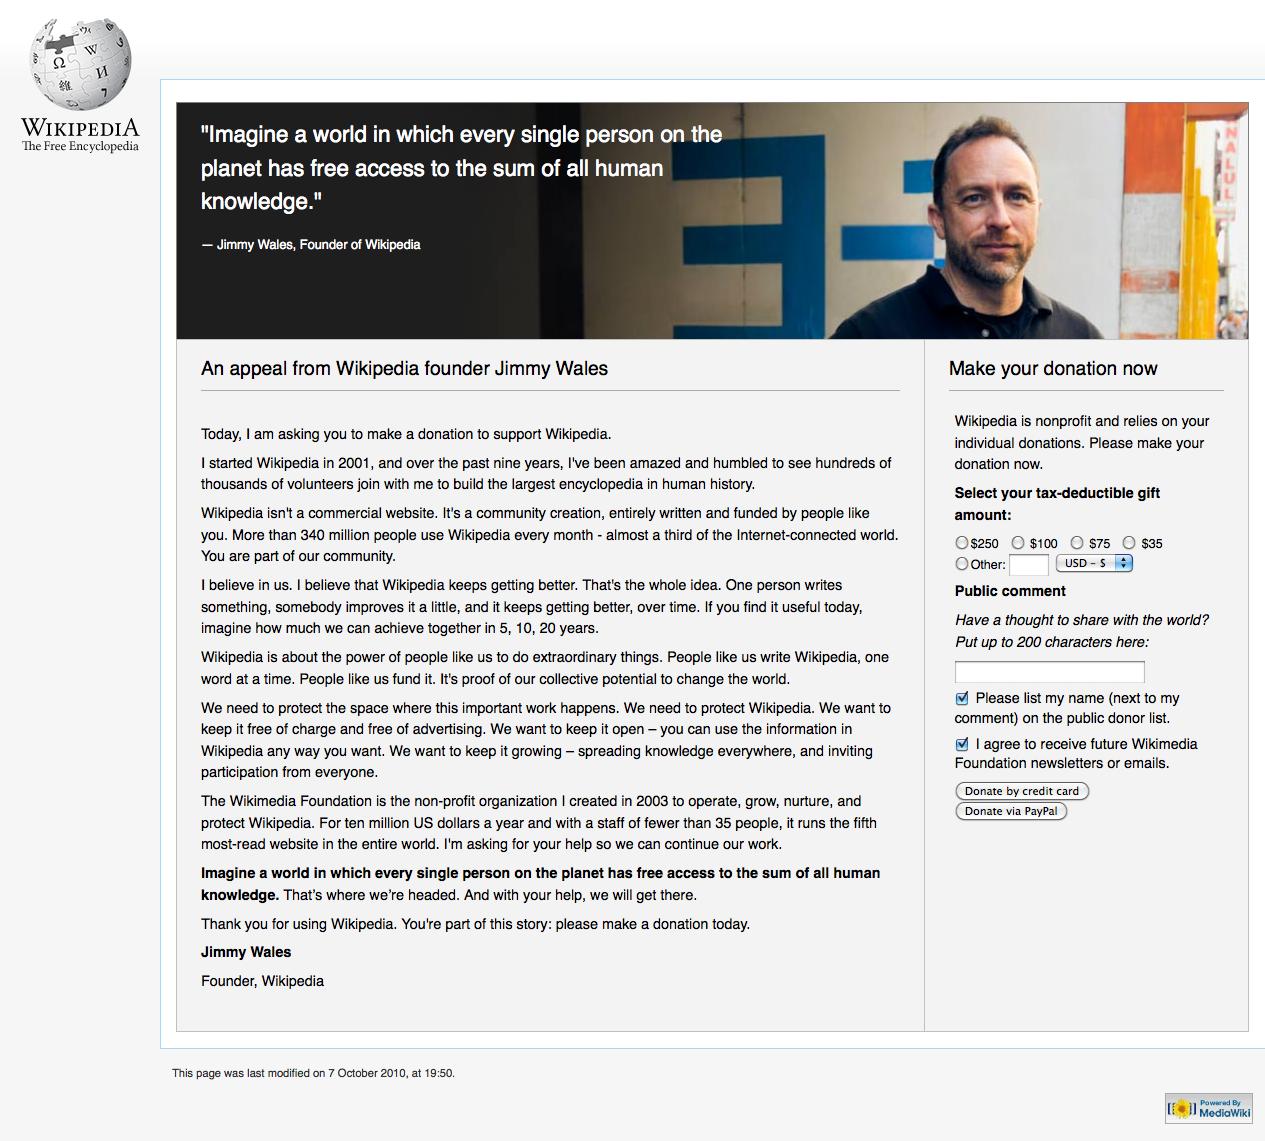 File:2010 Fundraising Landing Page A.png - a screenshote of a man with a beard and mustache